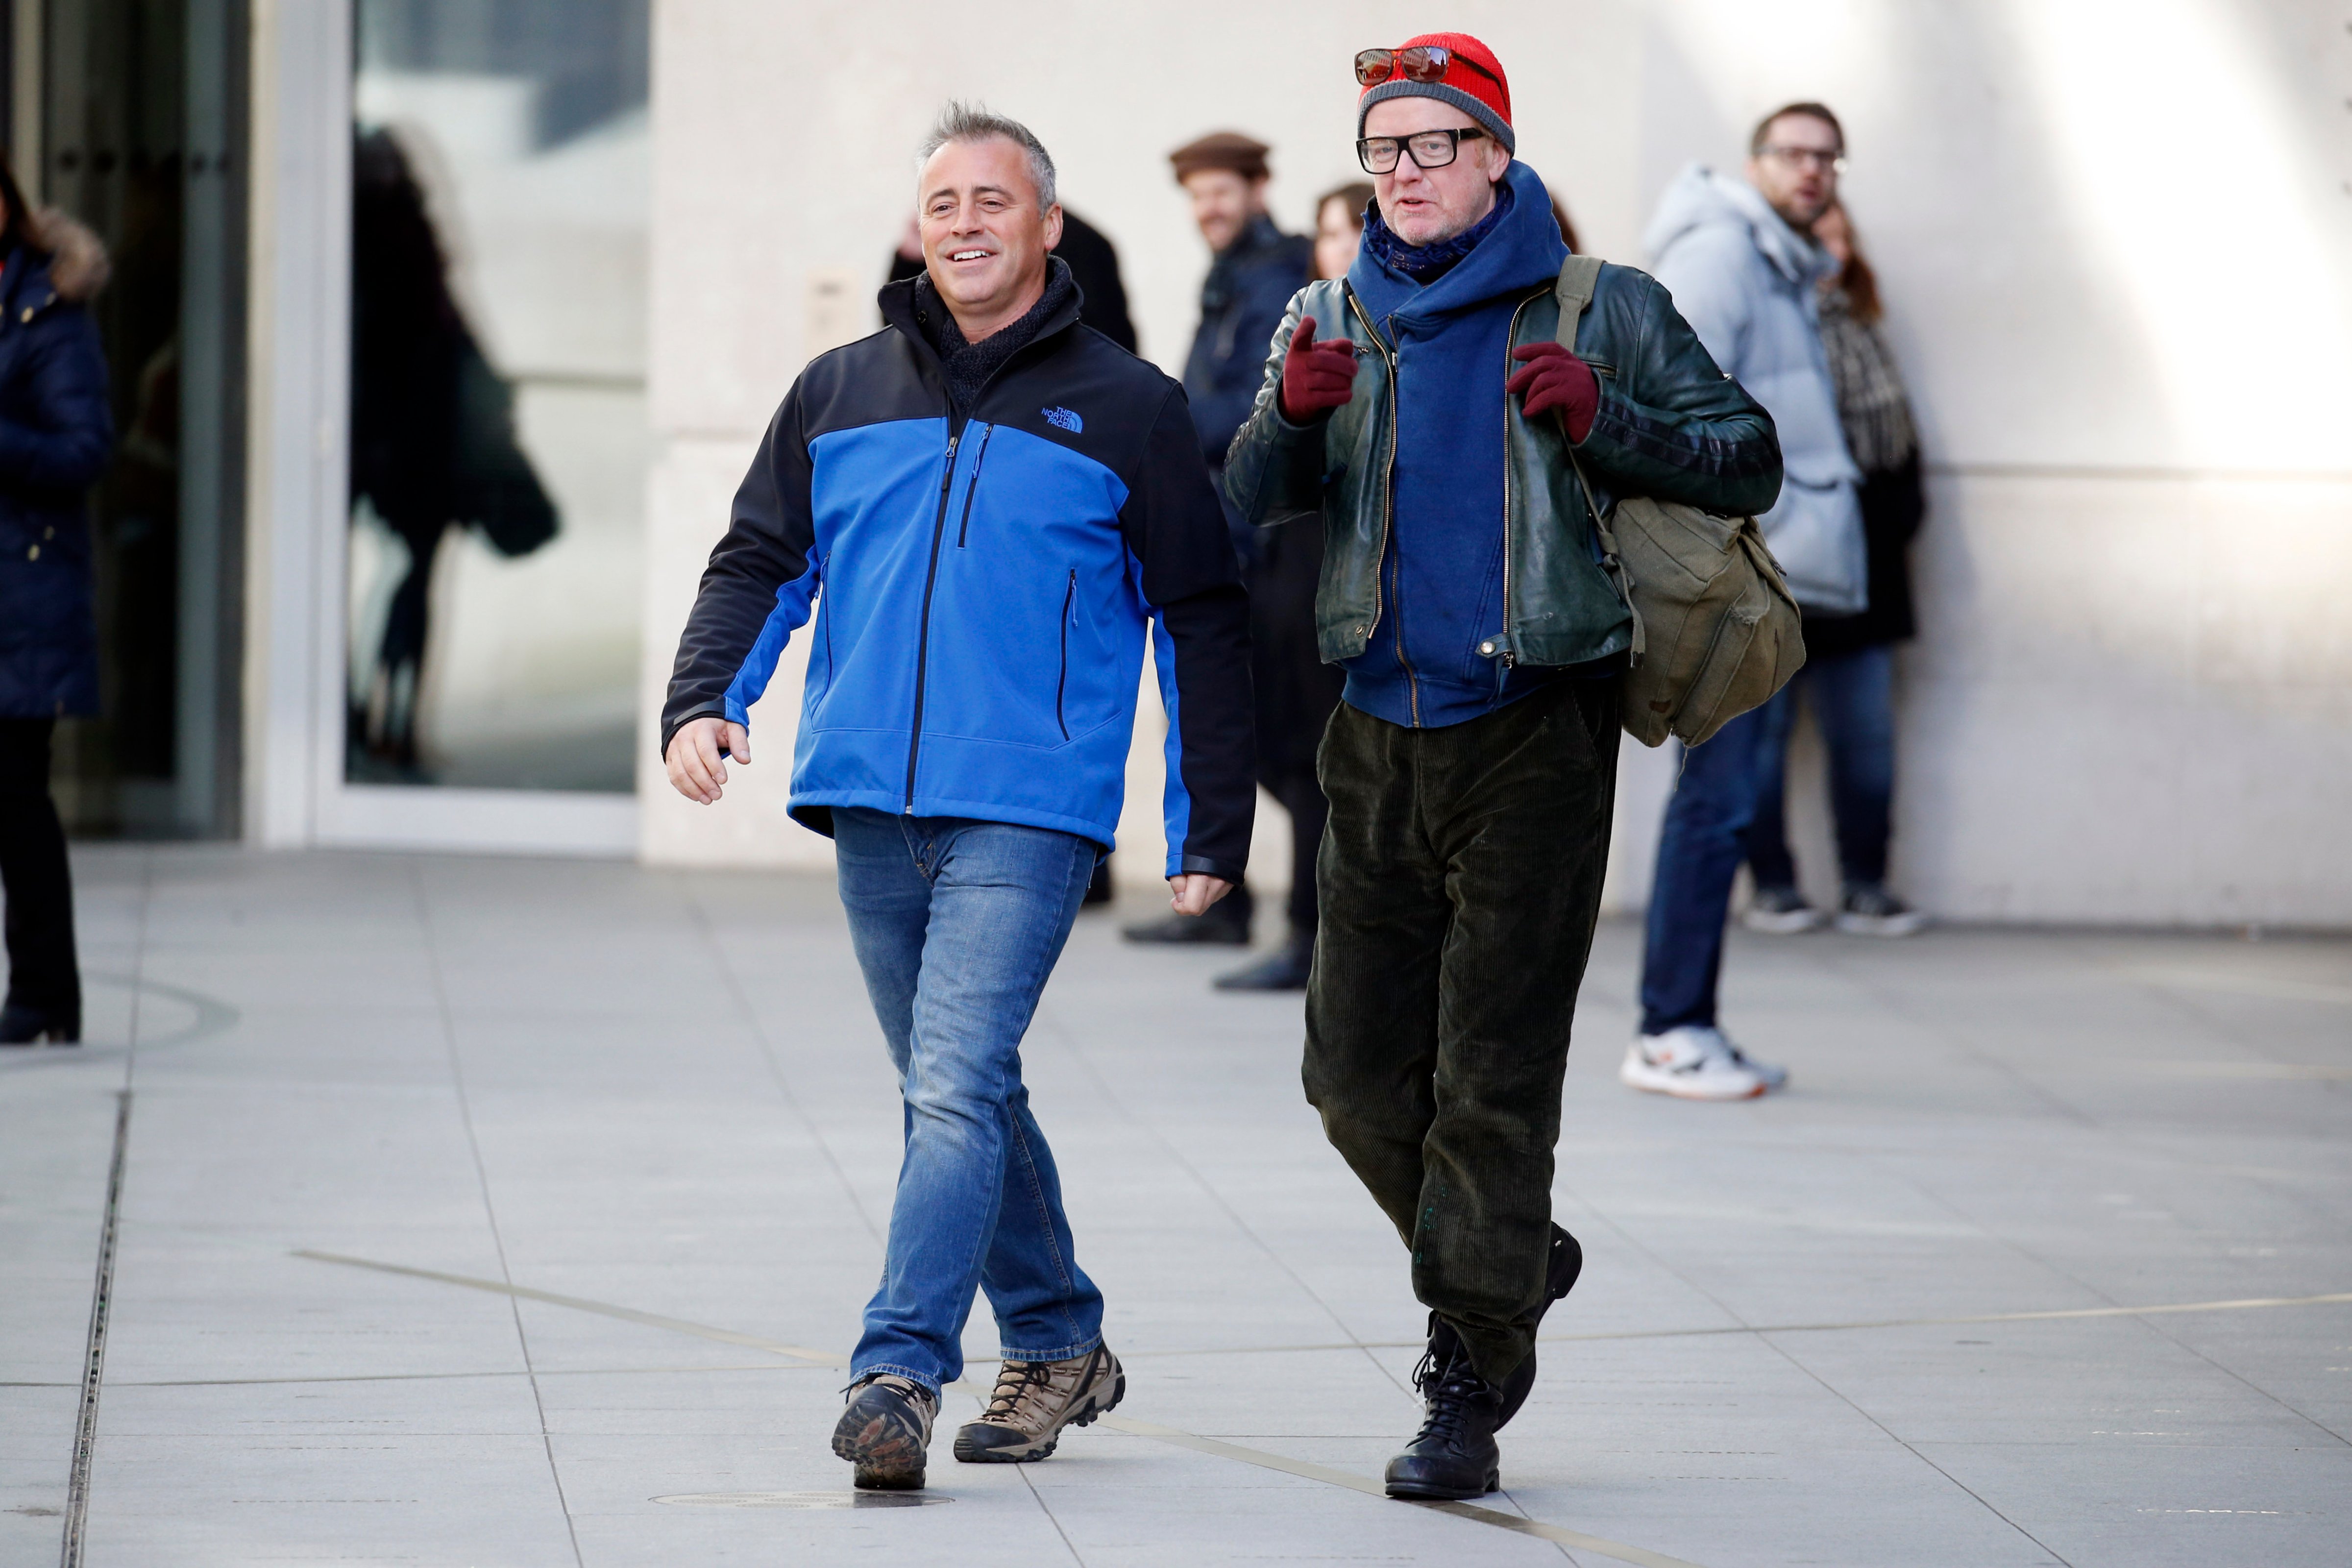 Matt Le Blanc and Chris Evans seen filming scenes for Top Gear on February 19, 2016 in London, England. (Neil Mockford/Alex Huckle—GC Images)